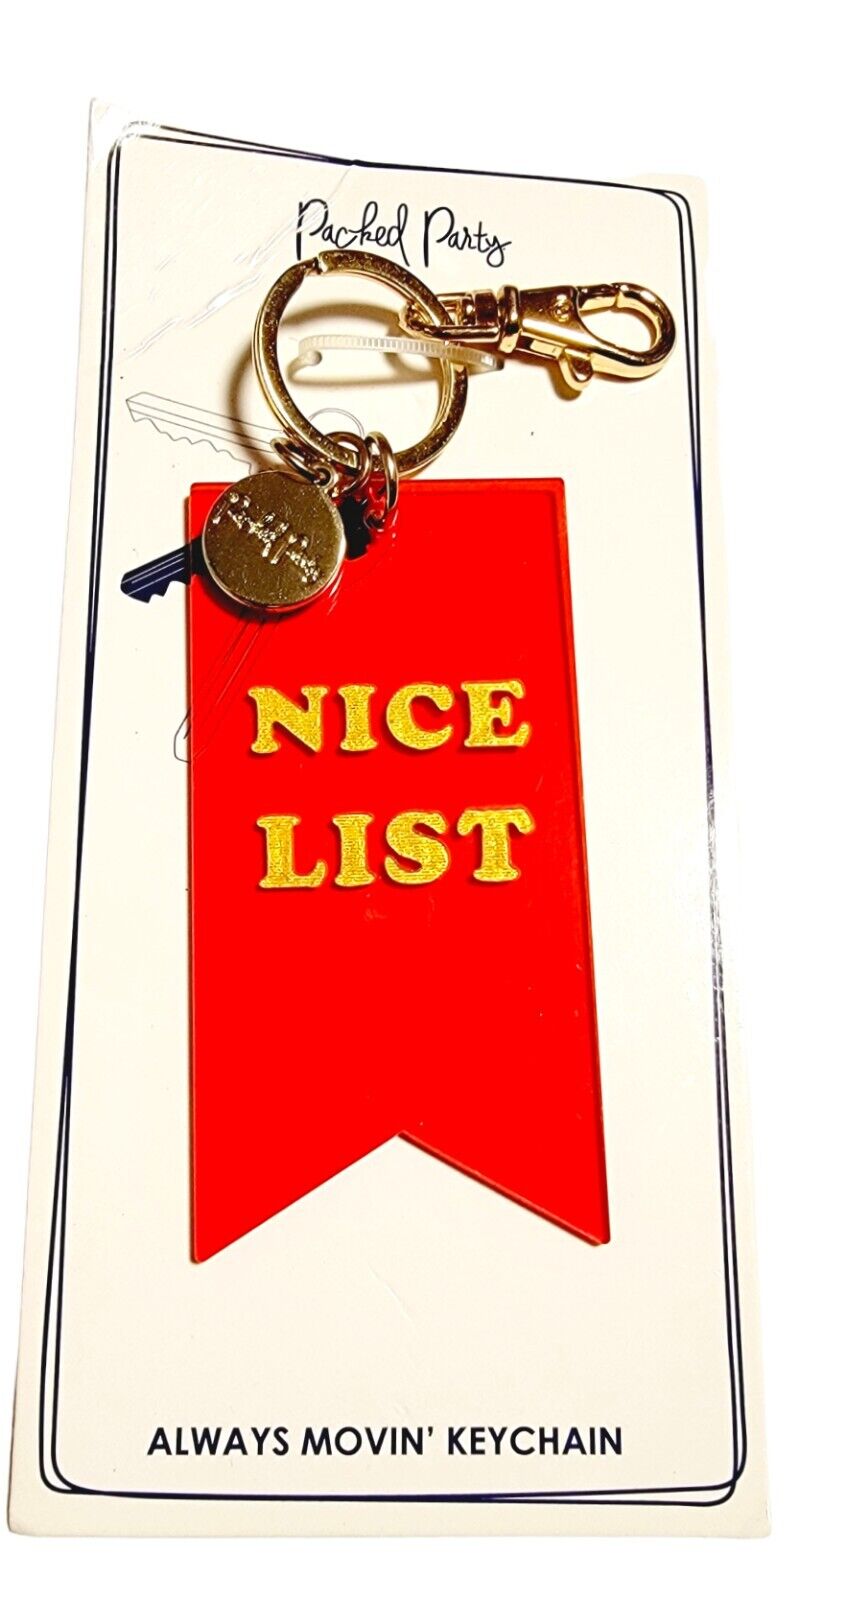 Nice List Keychain Packed Party Goldtone Metal Charm Logo Clip Keyring New Gift 